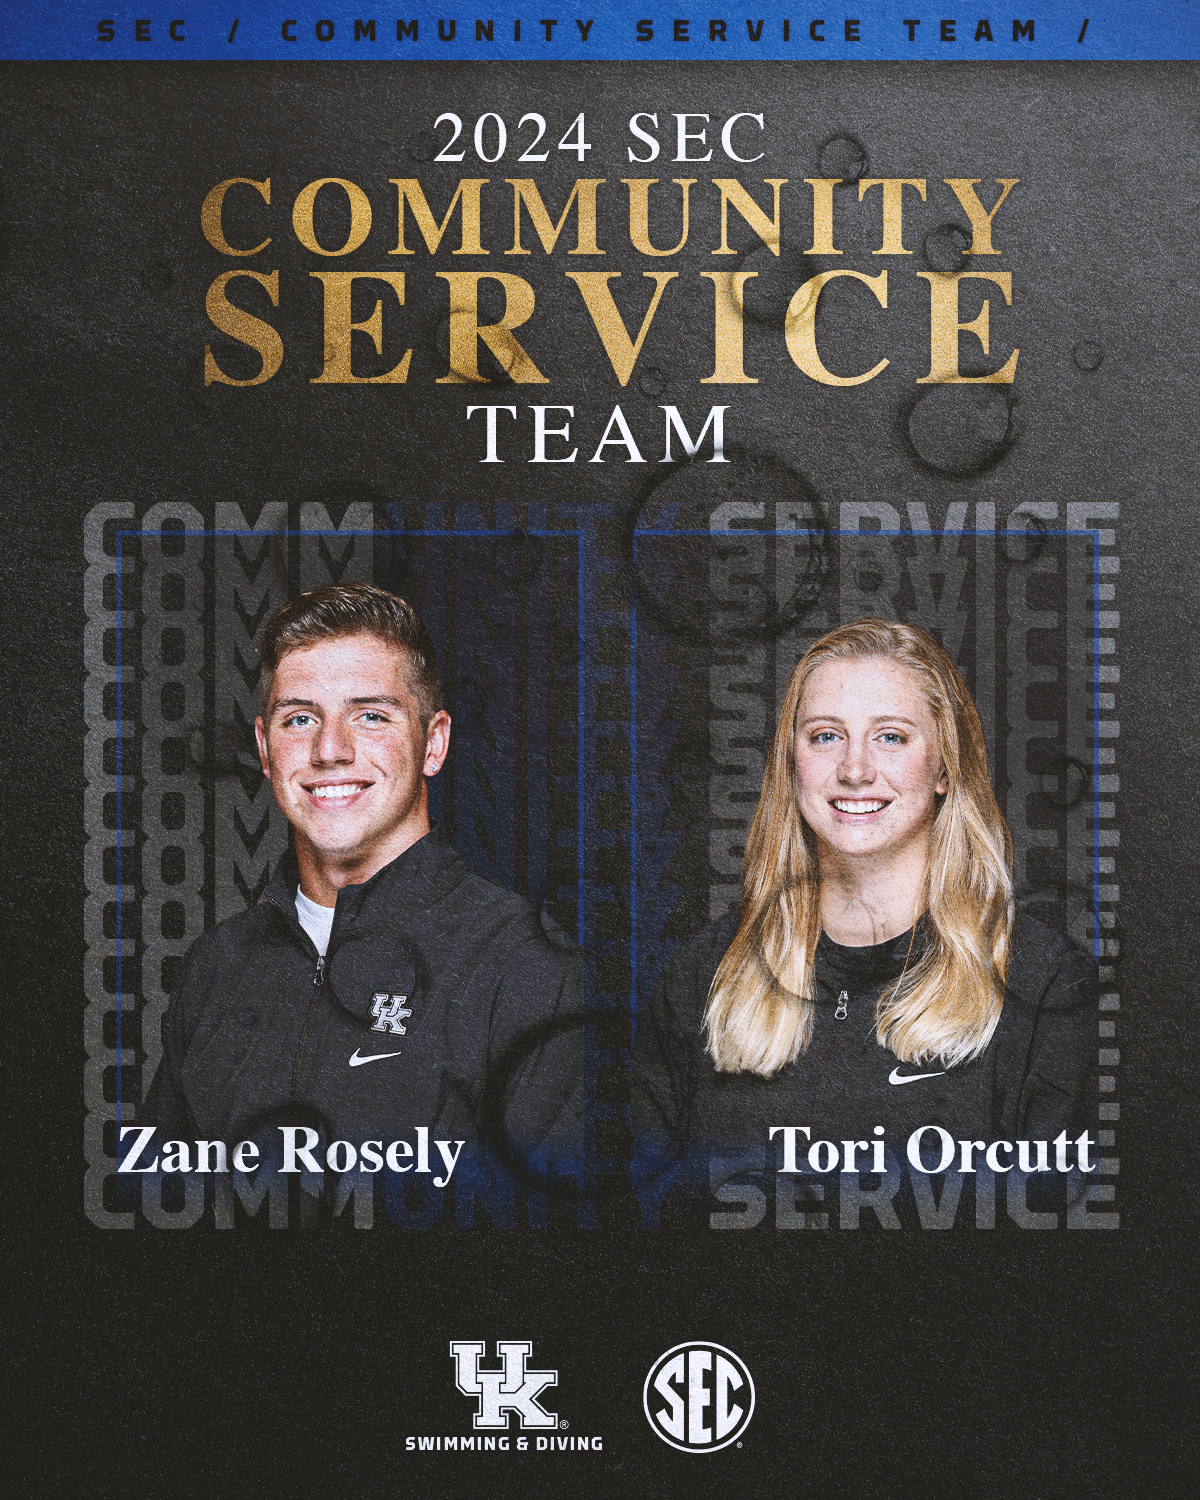 Captains Tori Orcutt and Zane Rosely Selected to SEC Swim & Dive Community Service Team